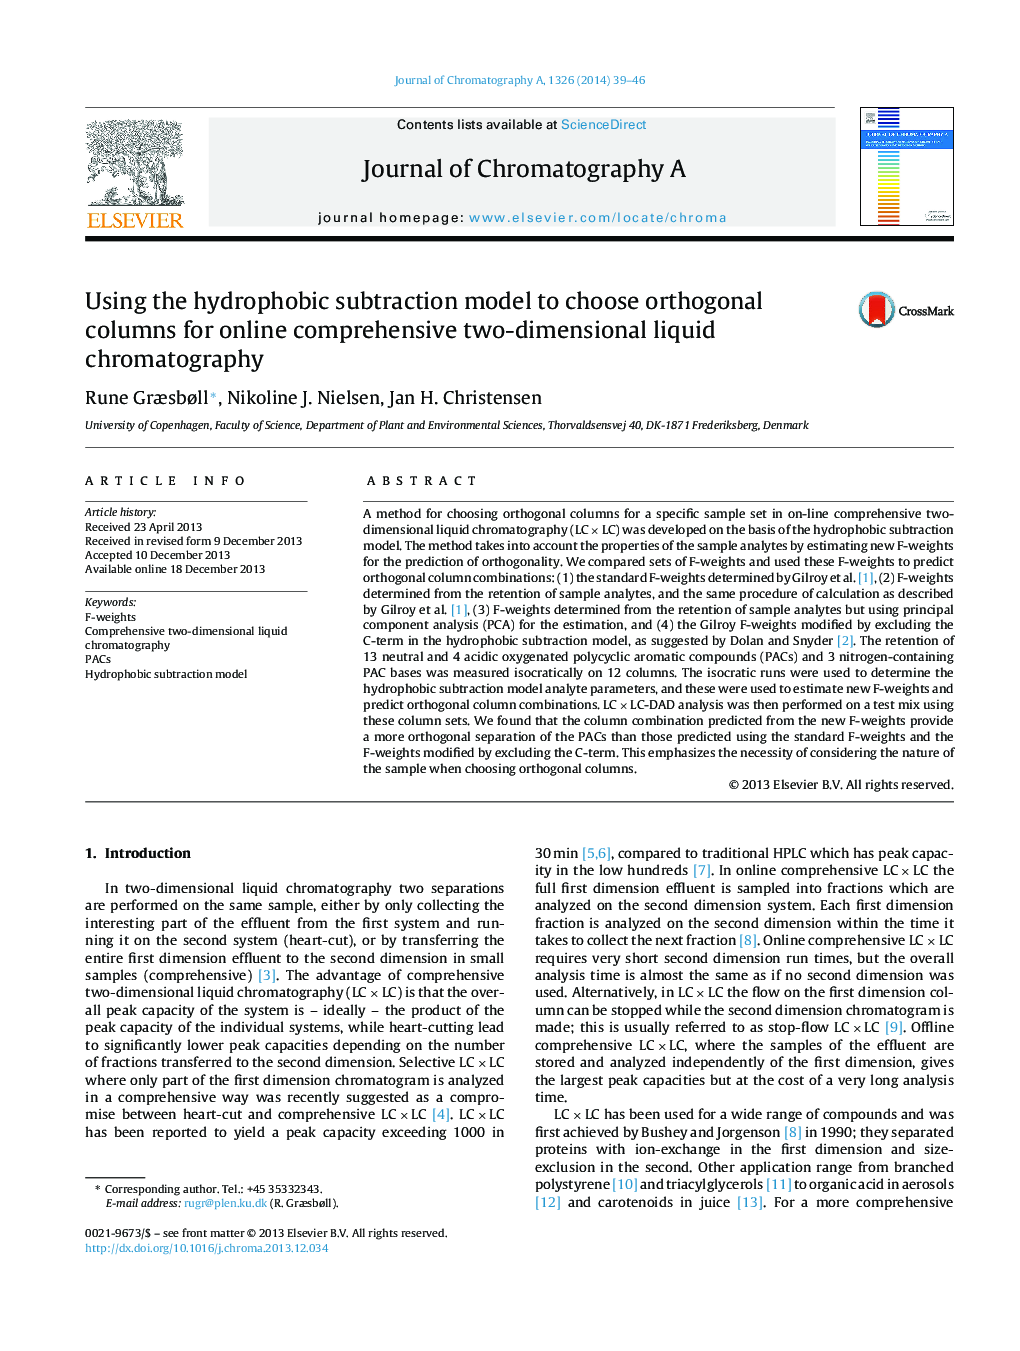 Using the hydrophobic subtraction model to choose orthogonal columns for online comprehensive two-dimensional liquid chromatography